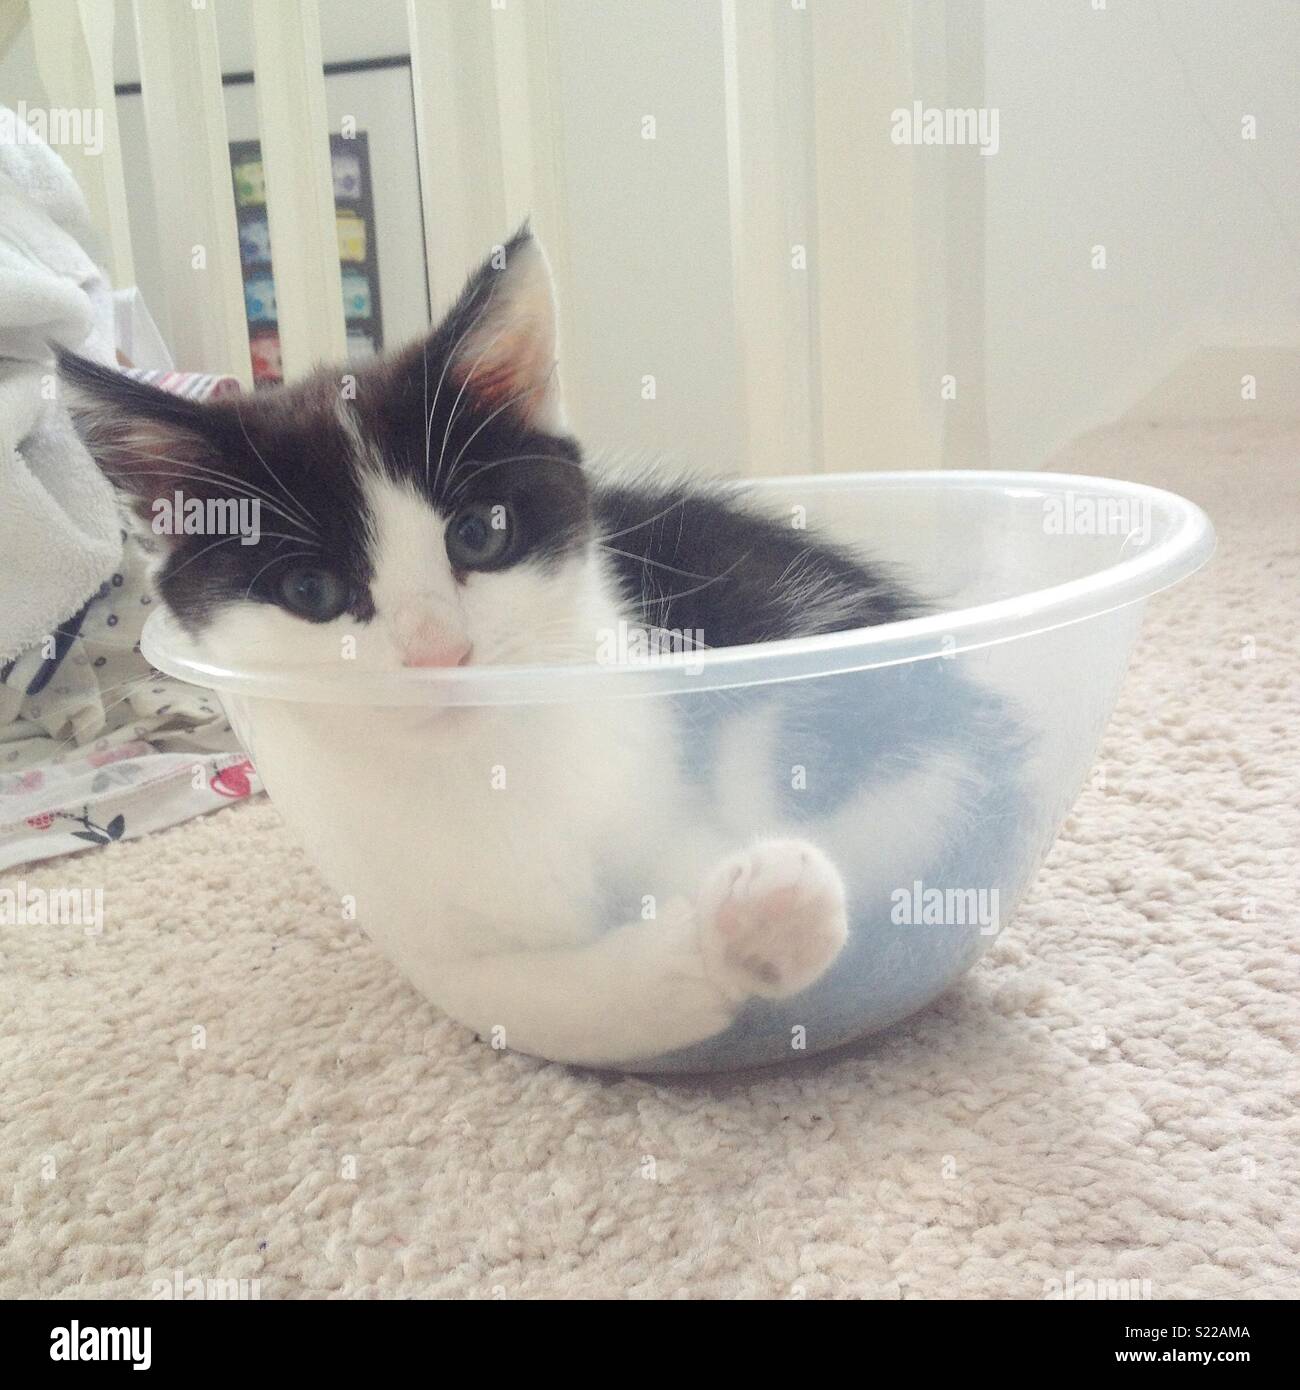 Black and white kitten curled up in a plastic bowl. Stock Photo